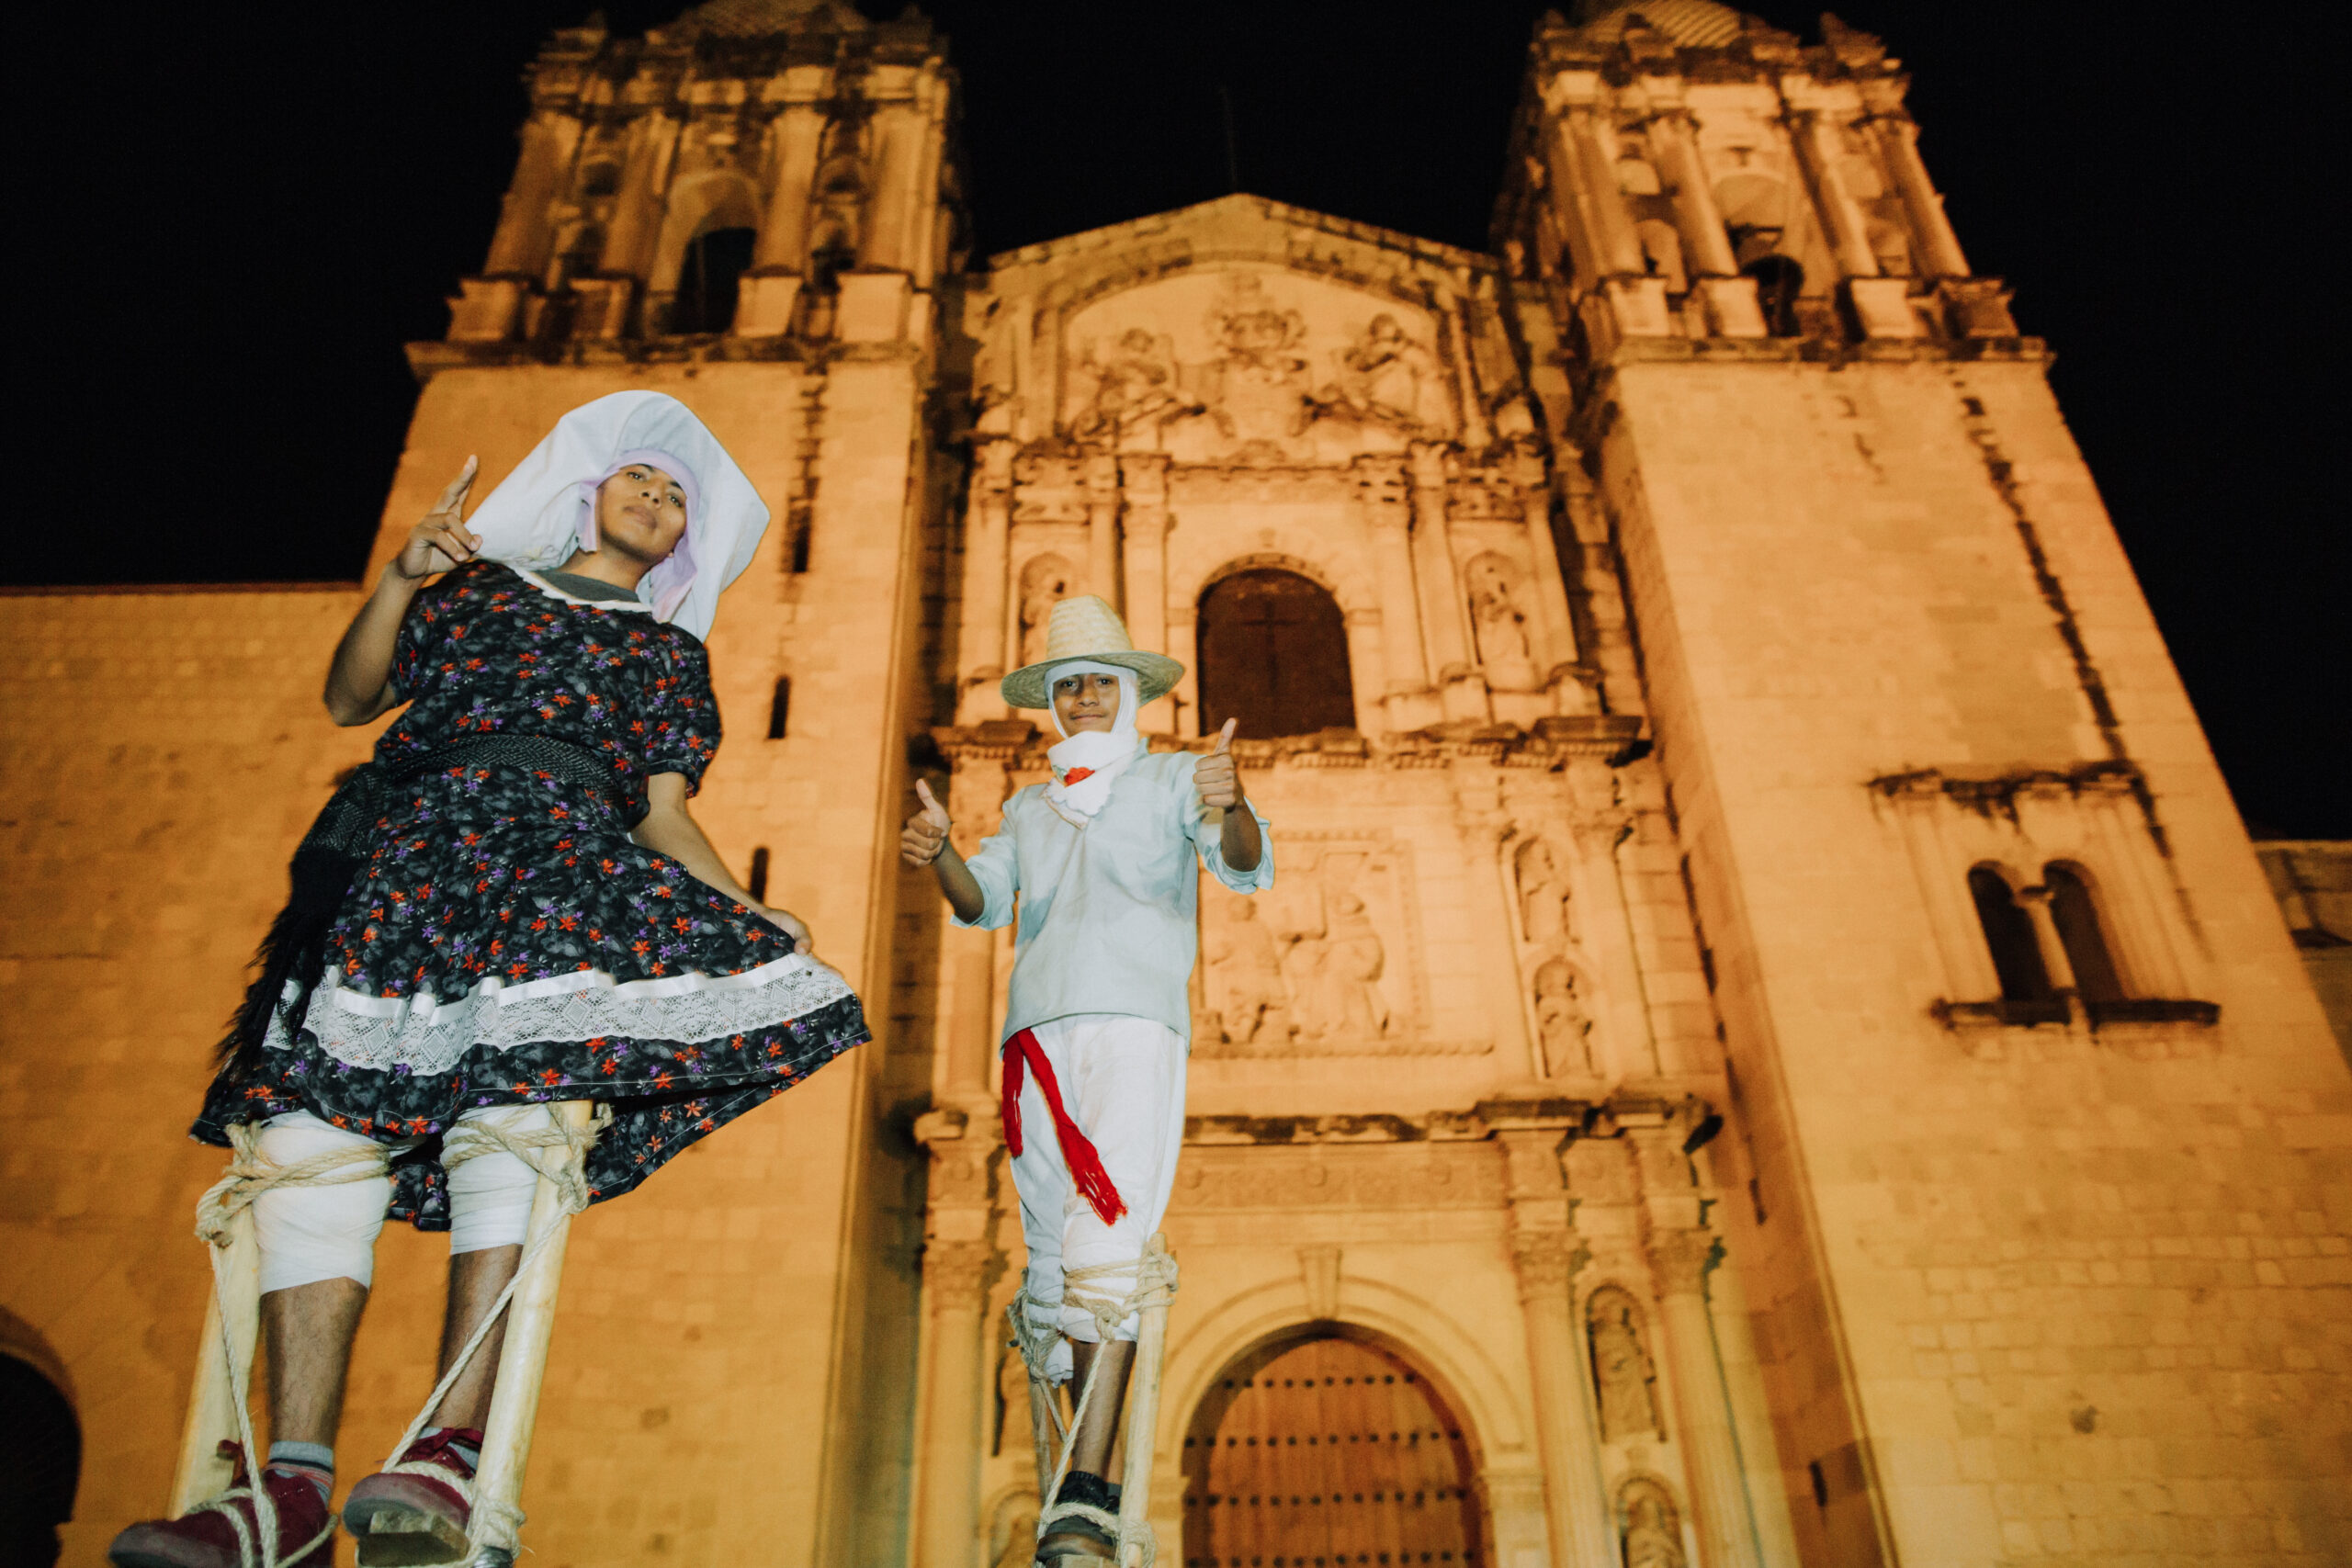 stiltwalkers pose in front of the stunning church venue